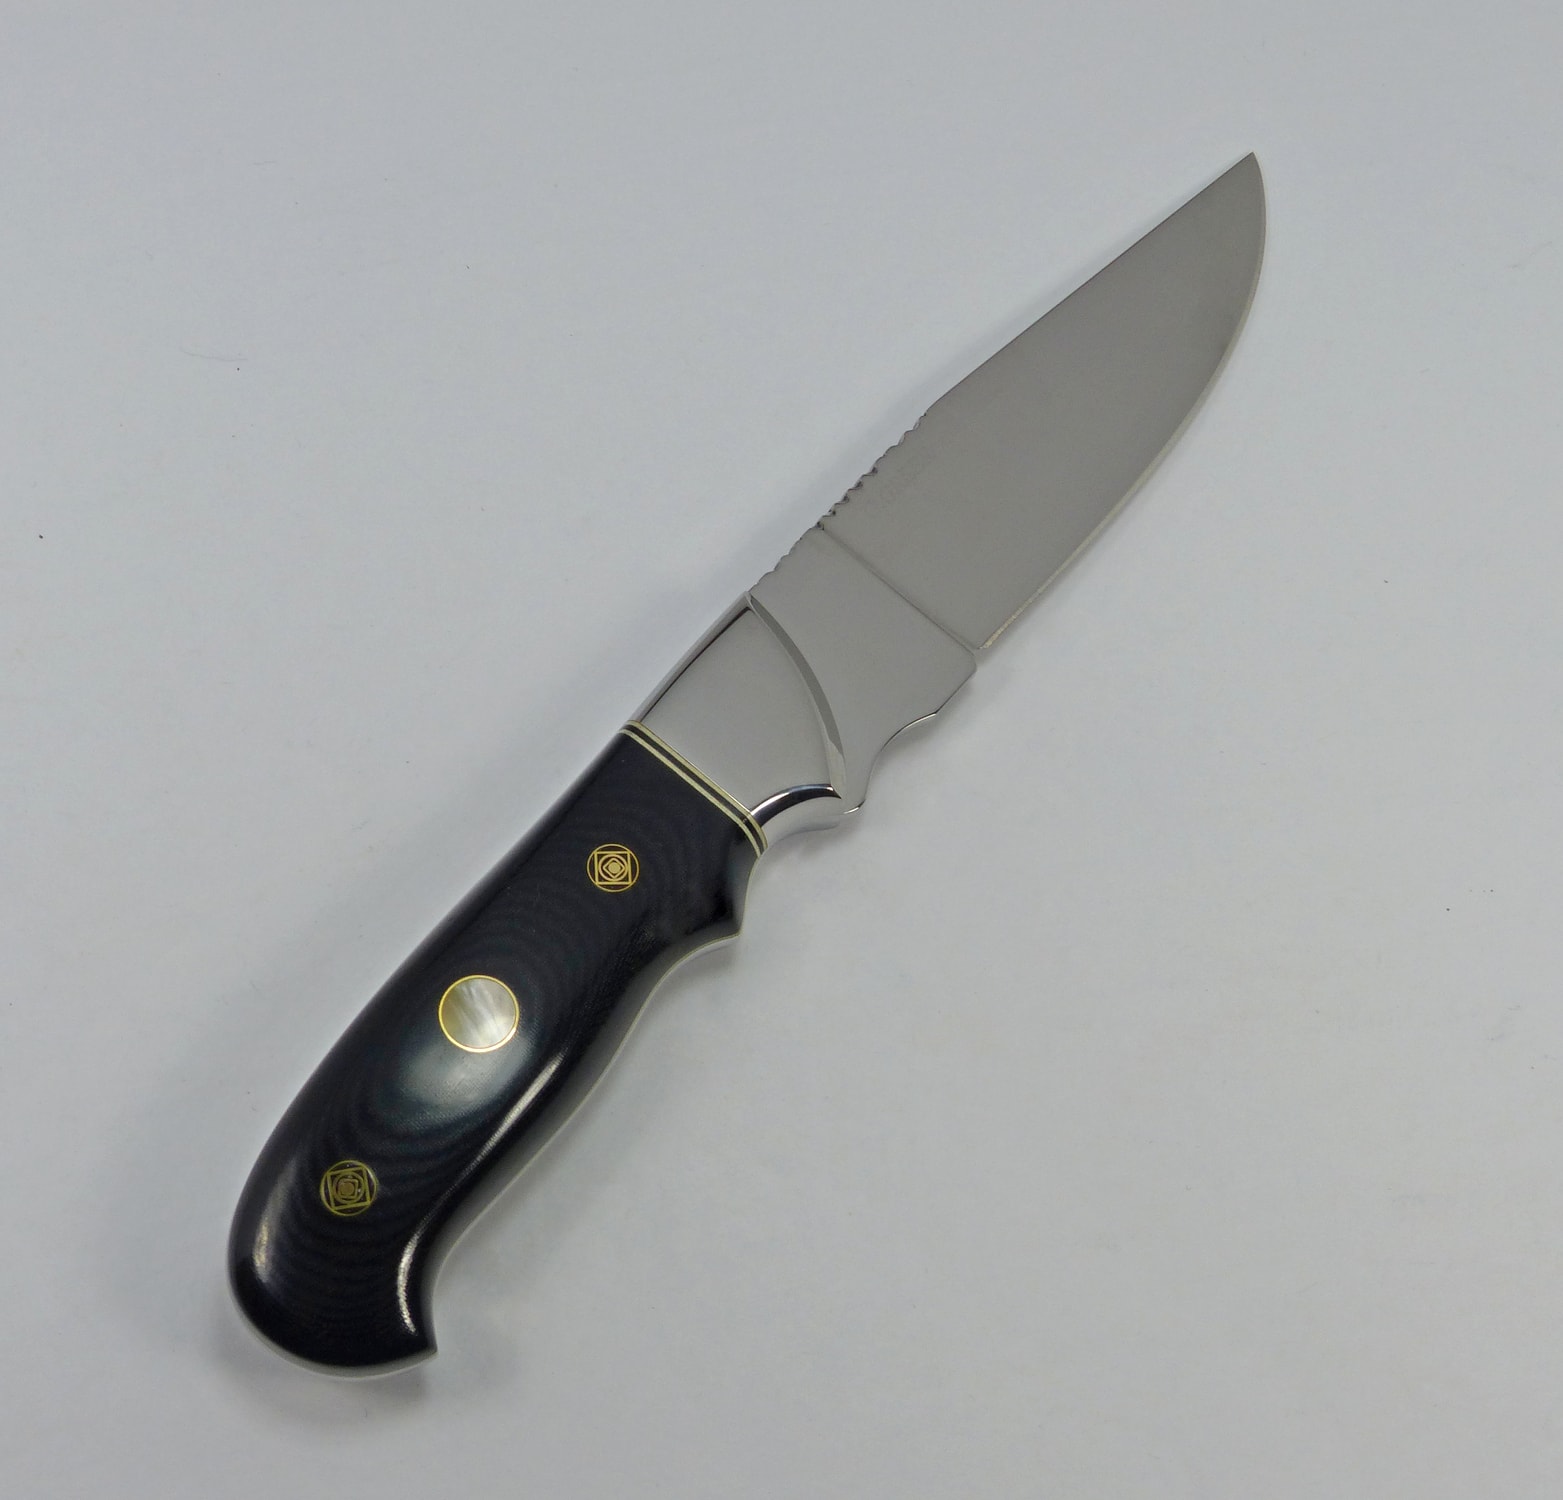 Black Linen Micarta knife with pearl polymer inlays, silver bolsters and filework